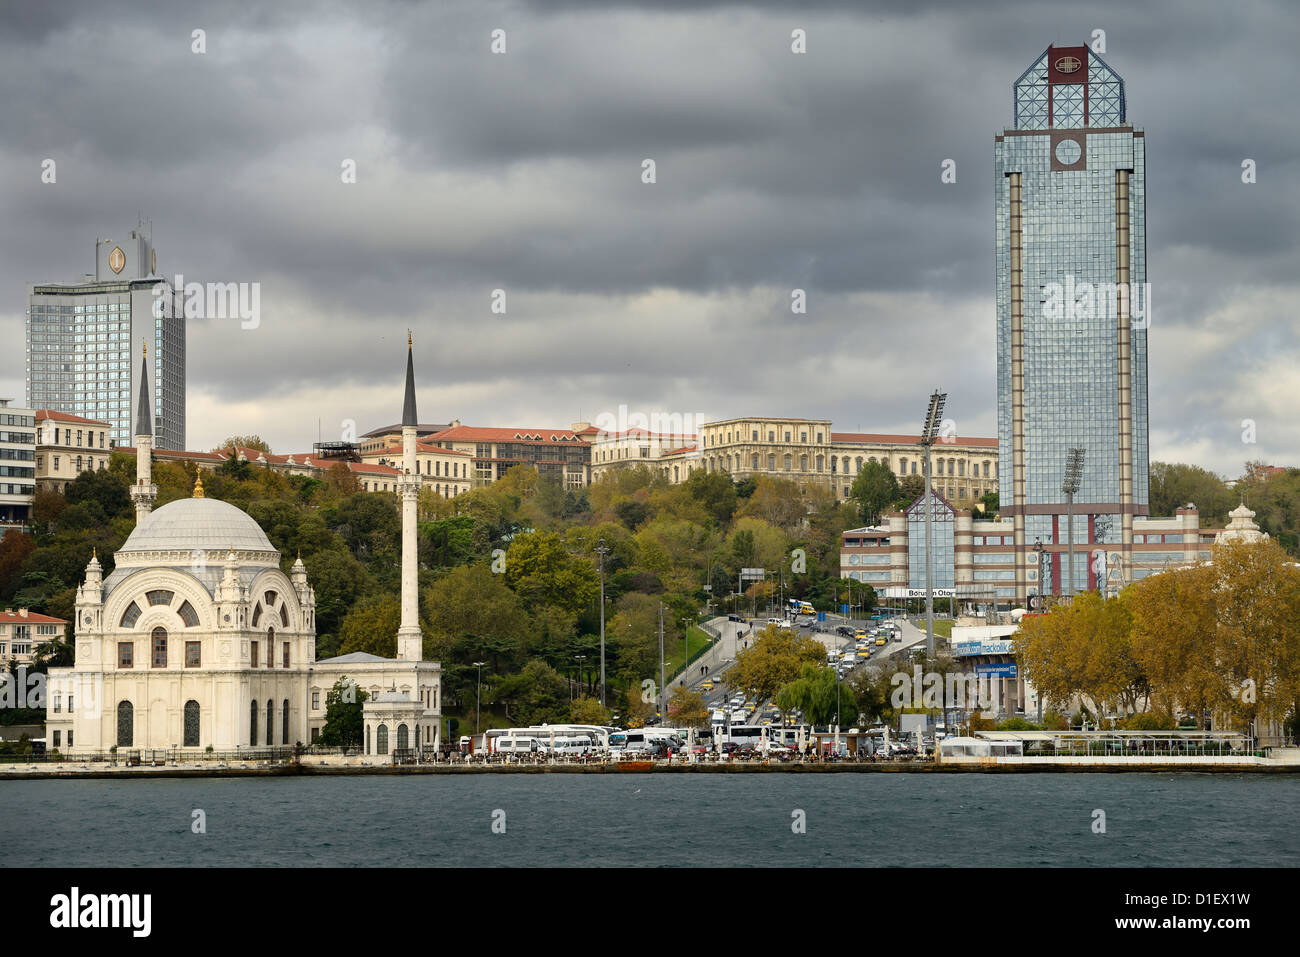 Dolmabahce Mosque surrounded by modern buildings on the Bosphorus Strait Istanbul Turkey Stock Photo